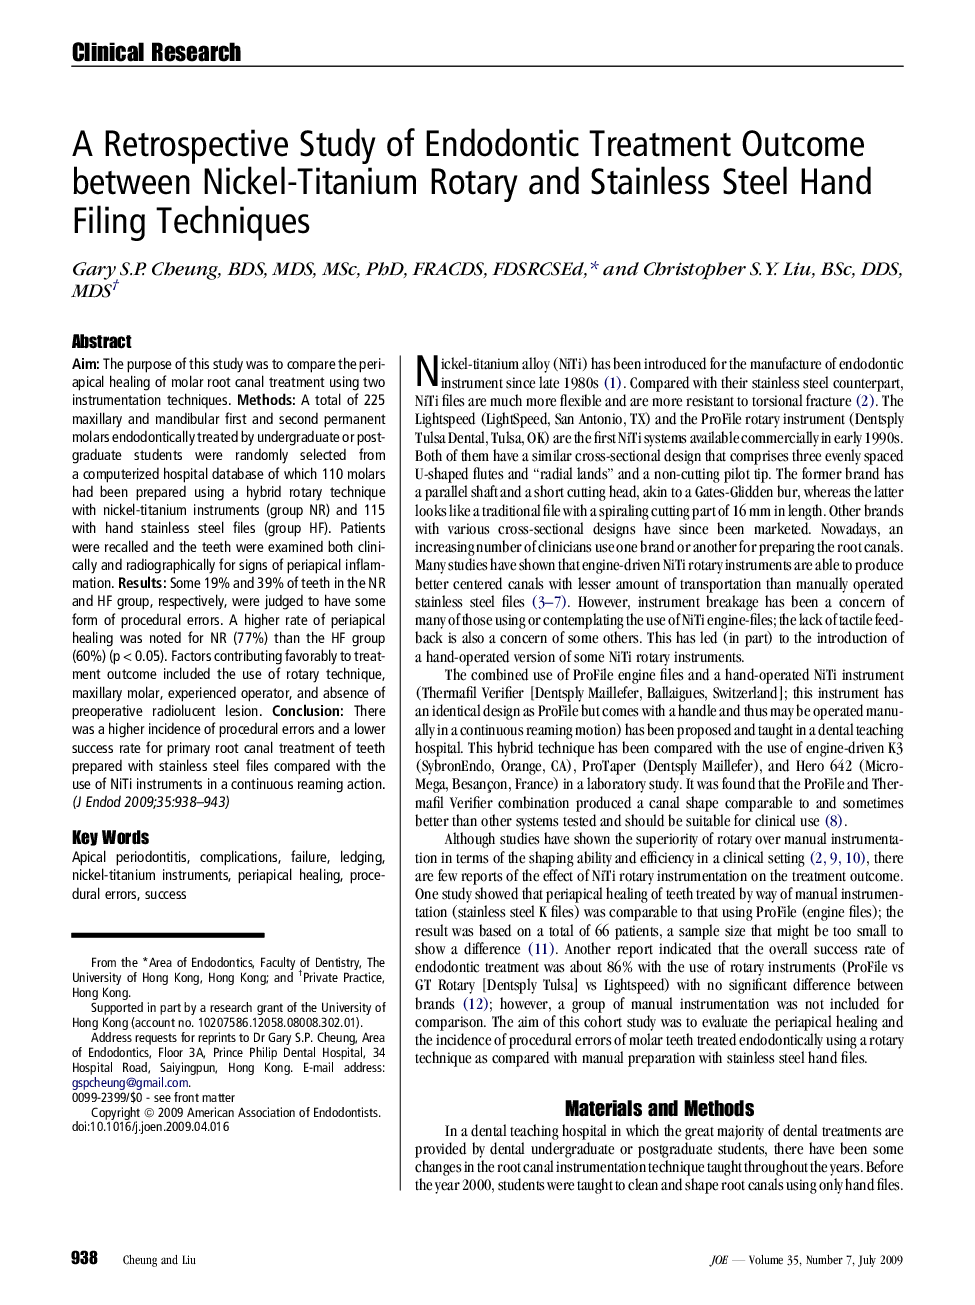 A Retrospective Study of Endodontic Treatment Outcome between Nickel-Titanium Rotary and Stainless Steel Hand Filing Techniques 